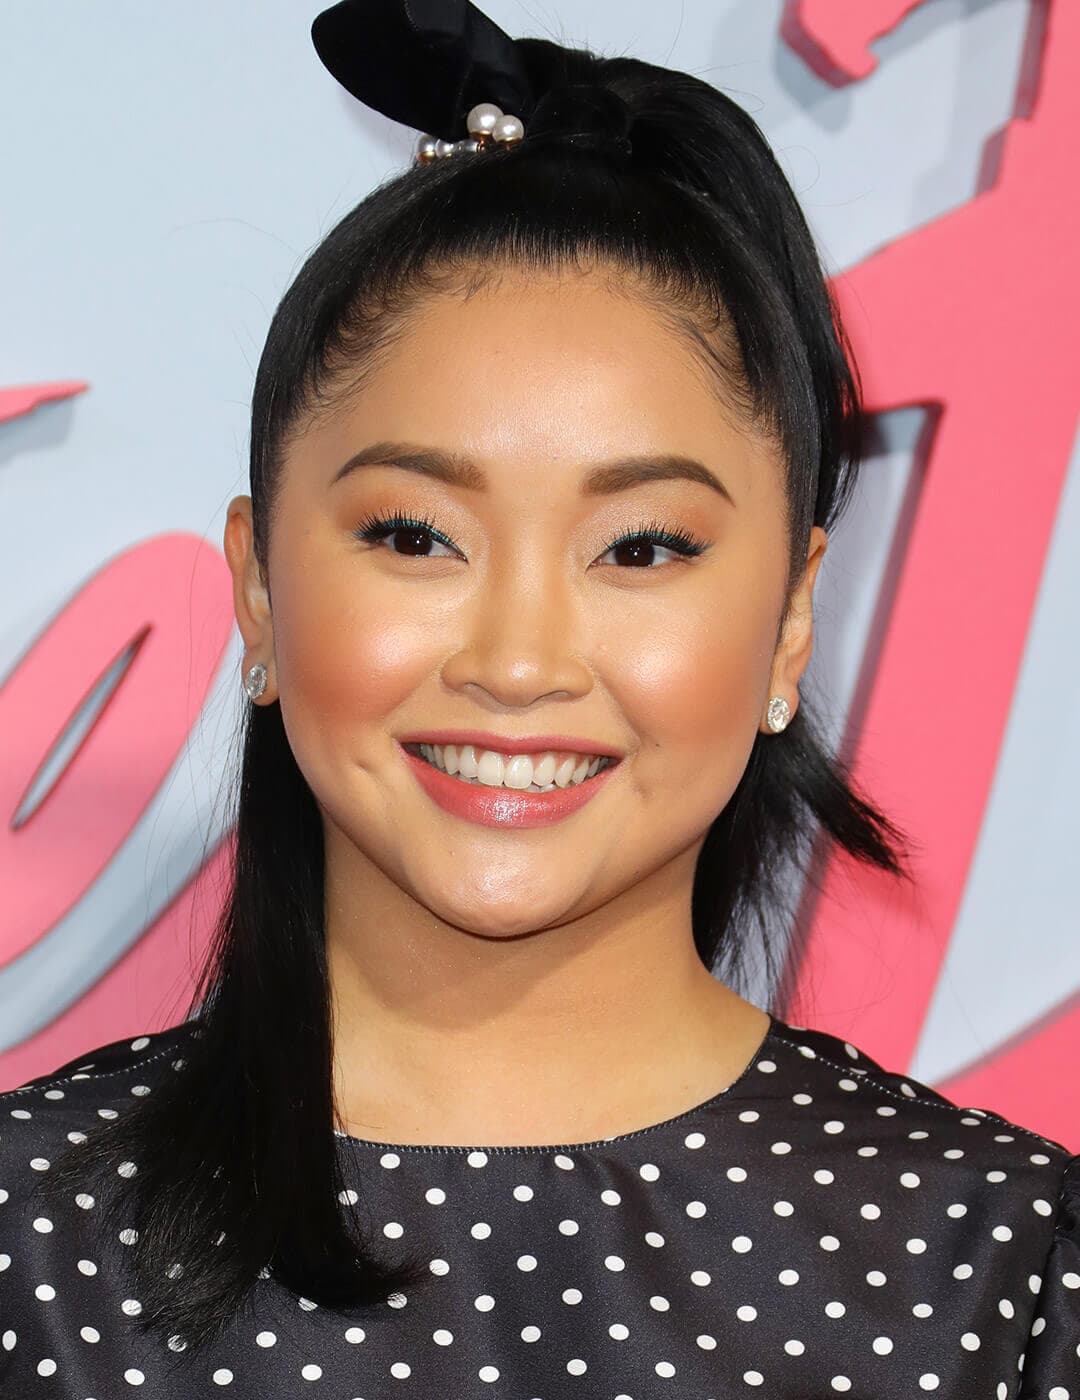 A photo of Lana Condor wearing a black hairband with pearls